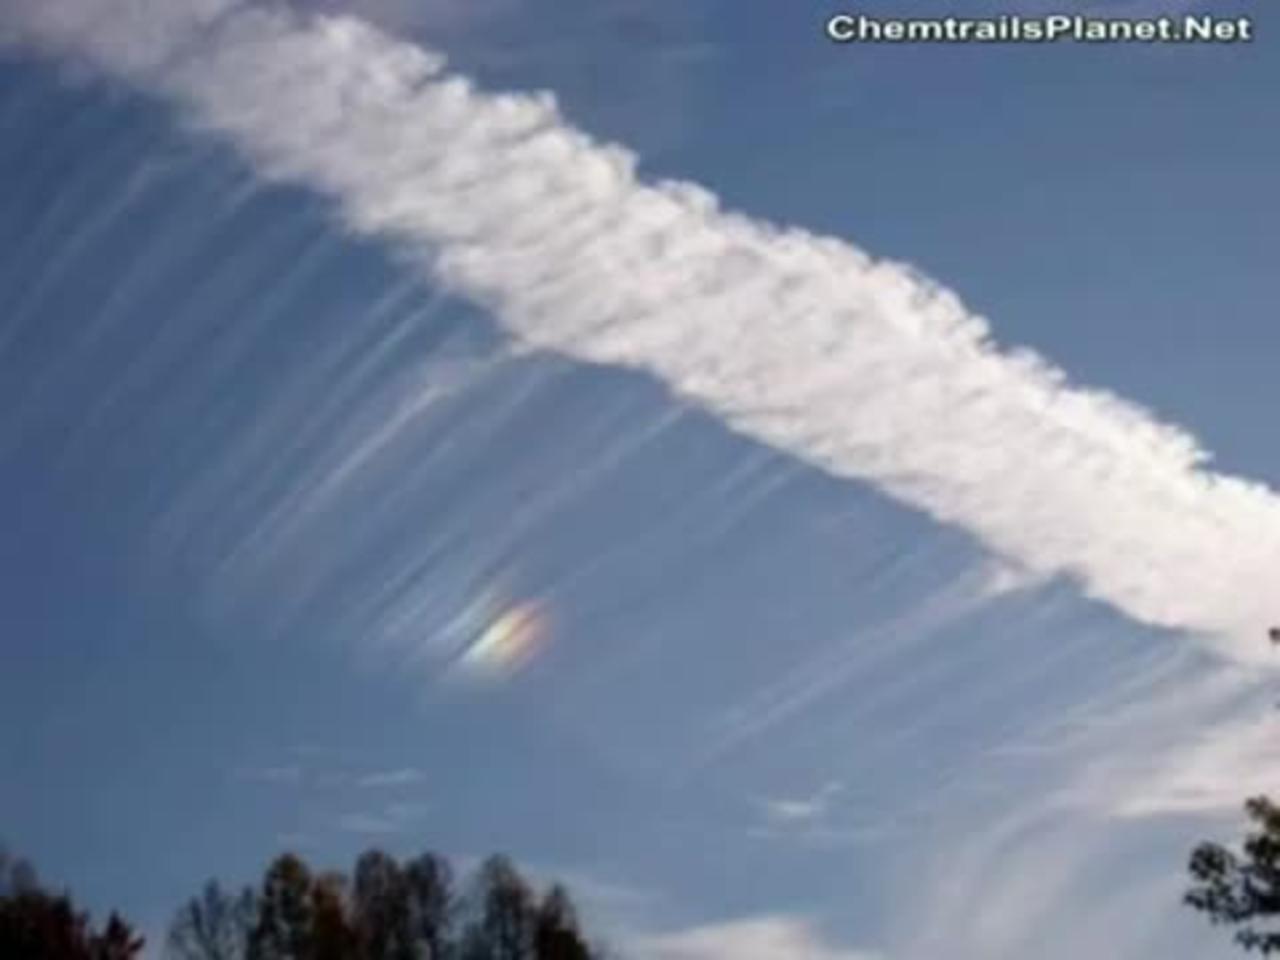 Chemtrails began as smoke screens or was it just the excuse